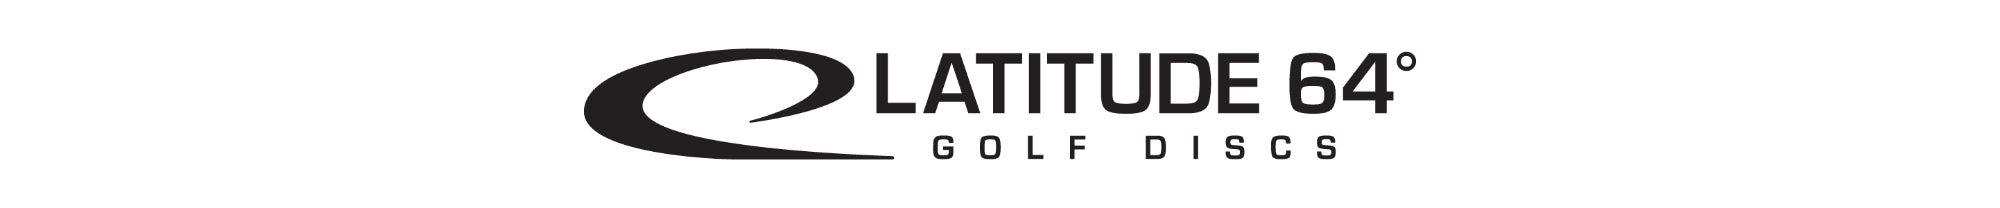 All Latitude 64 - Select to View Color Options